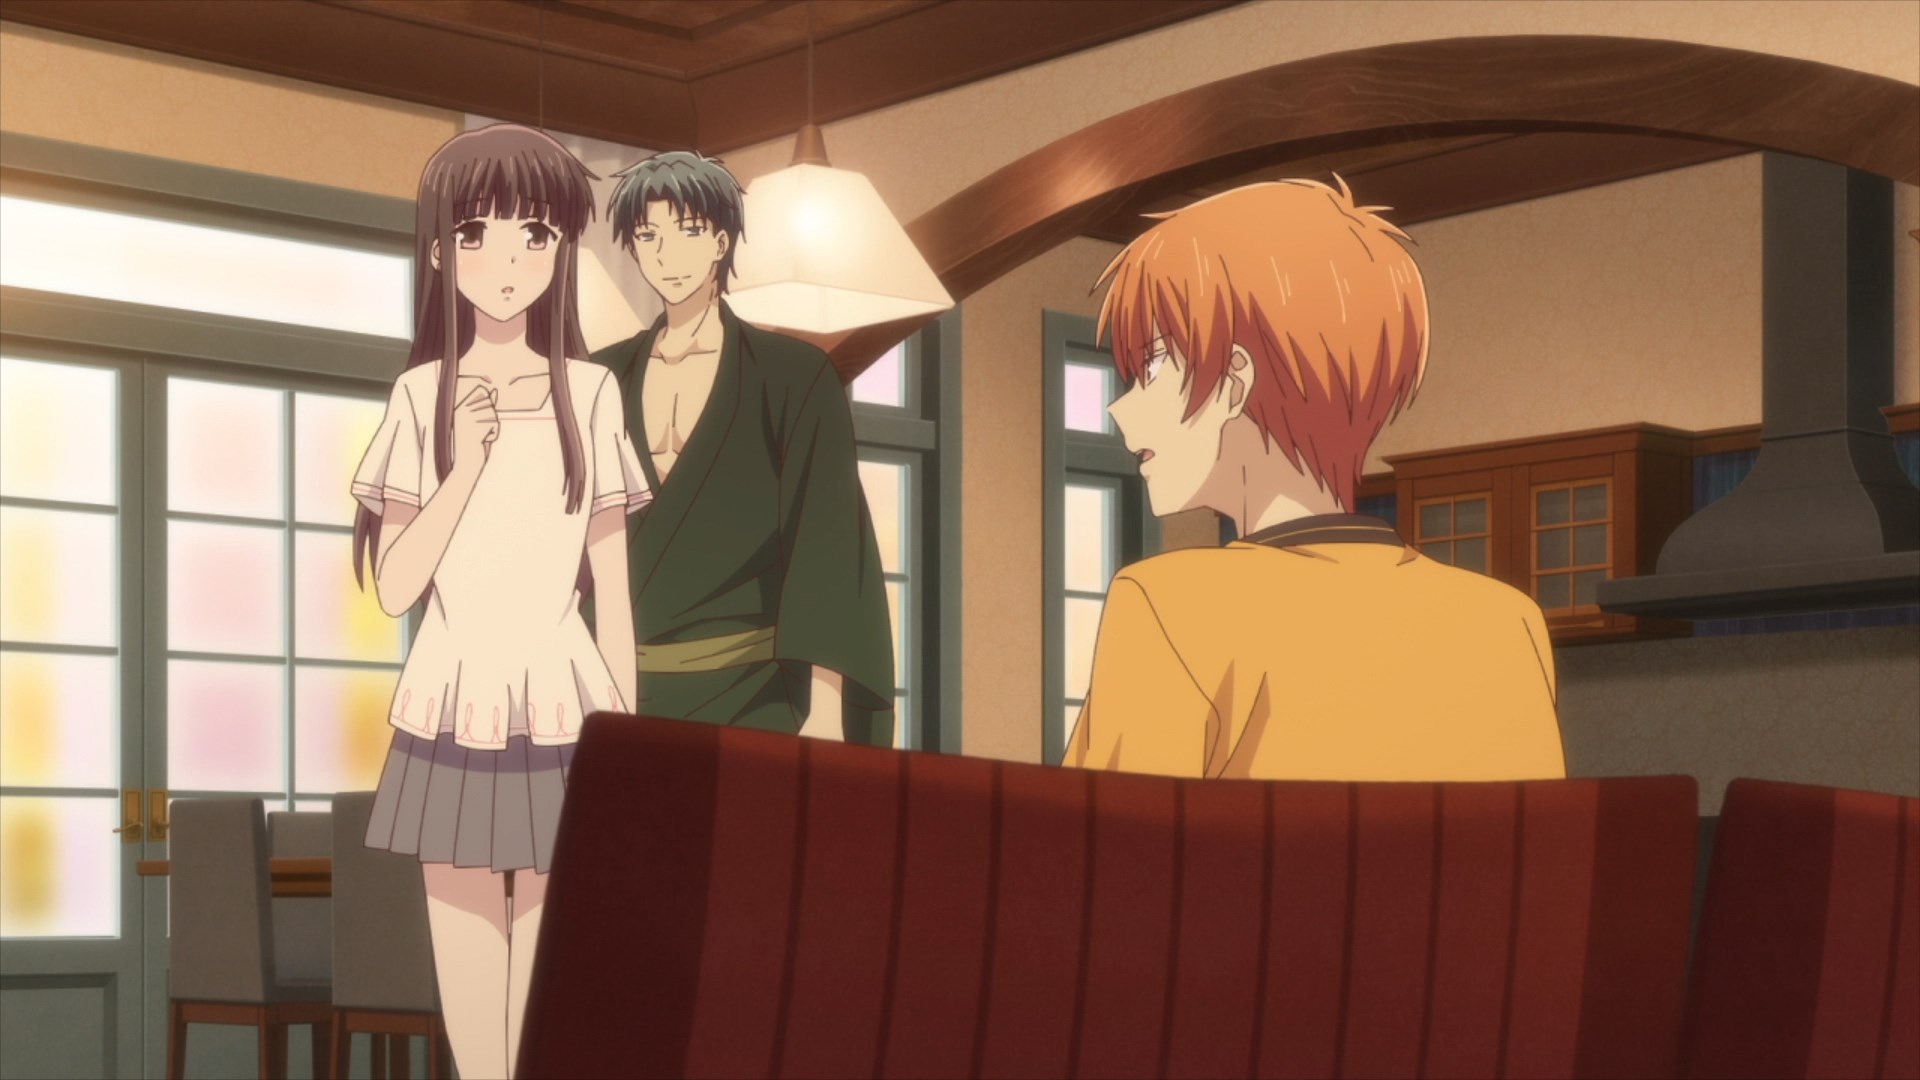 Fruits Basket 2019 Episode 12 Review – Anime Rants